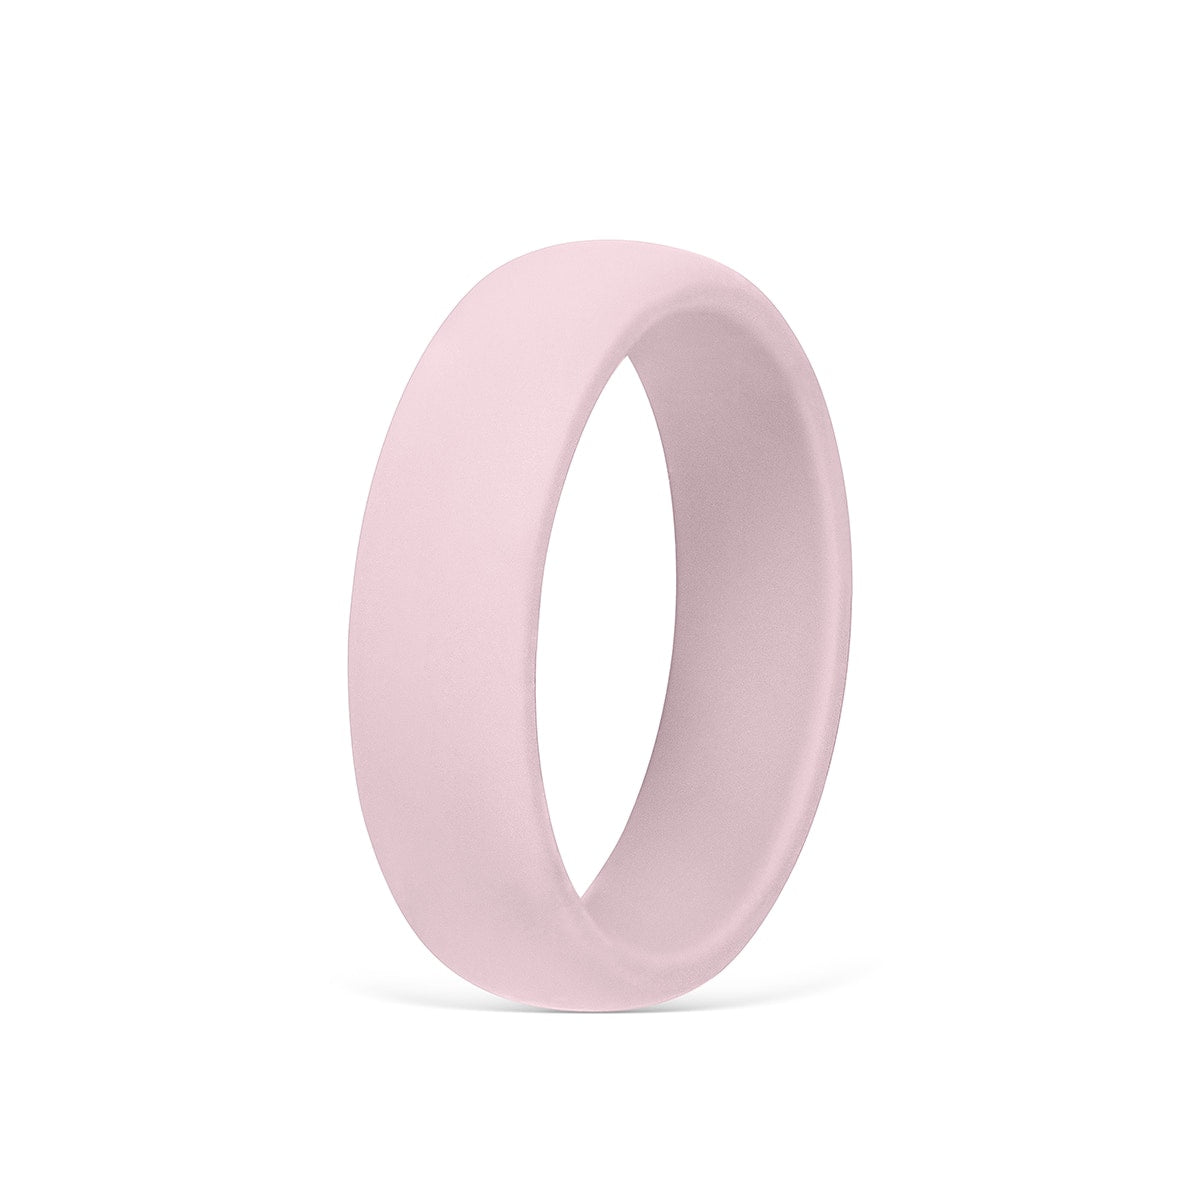 Pink womens silicone wedding bands 